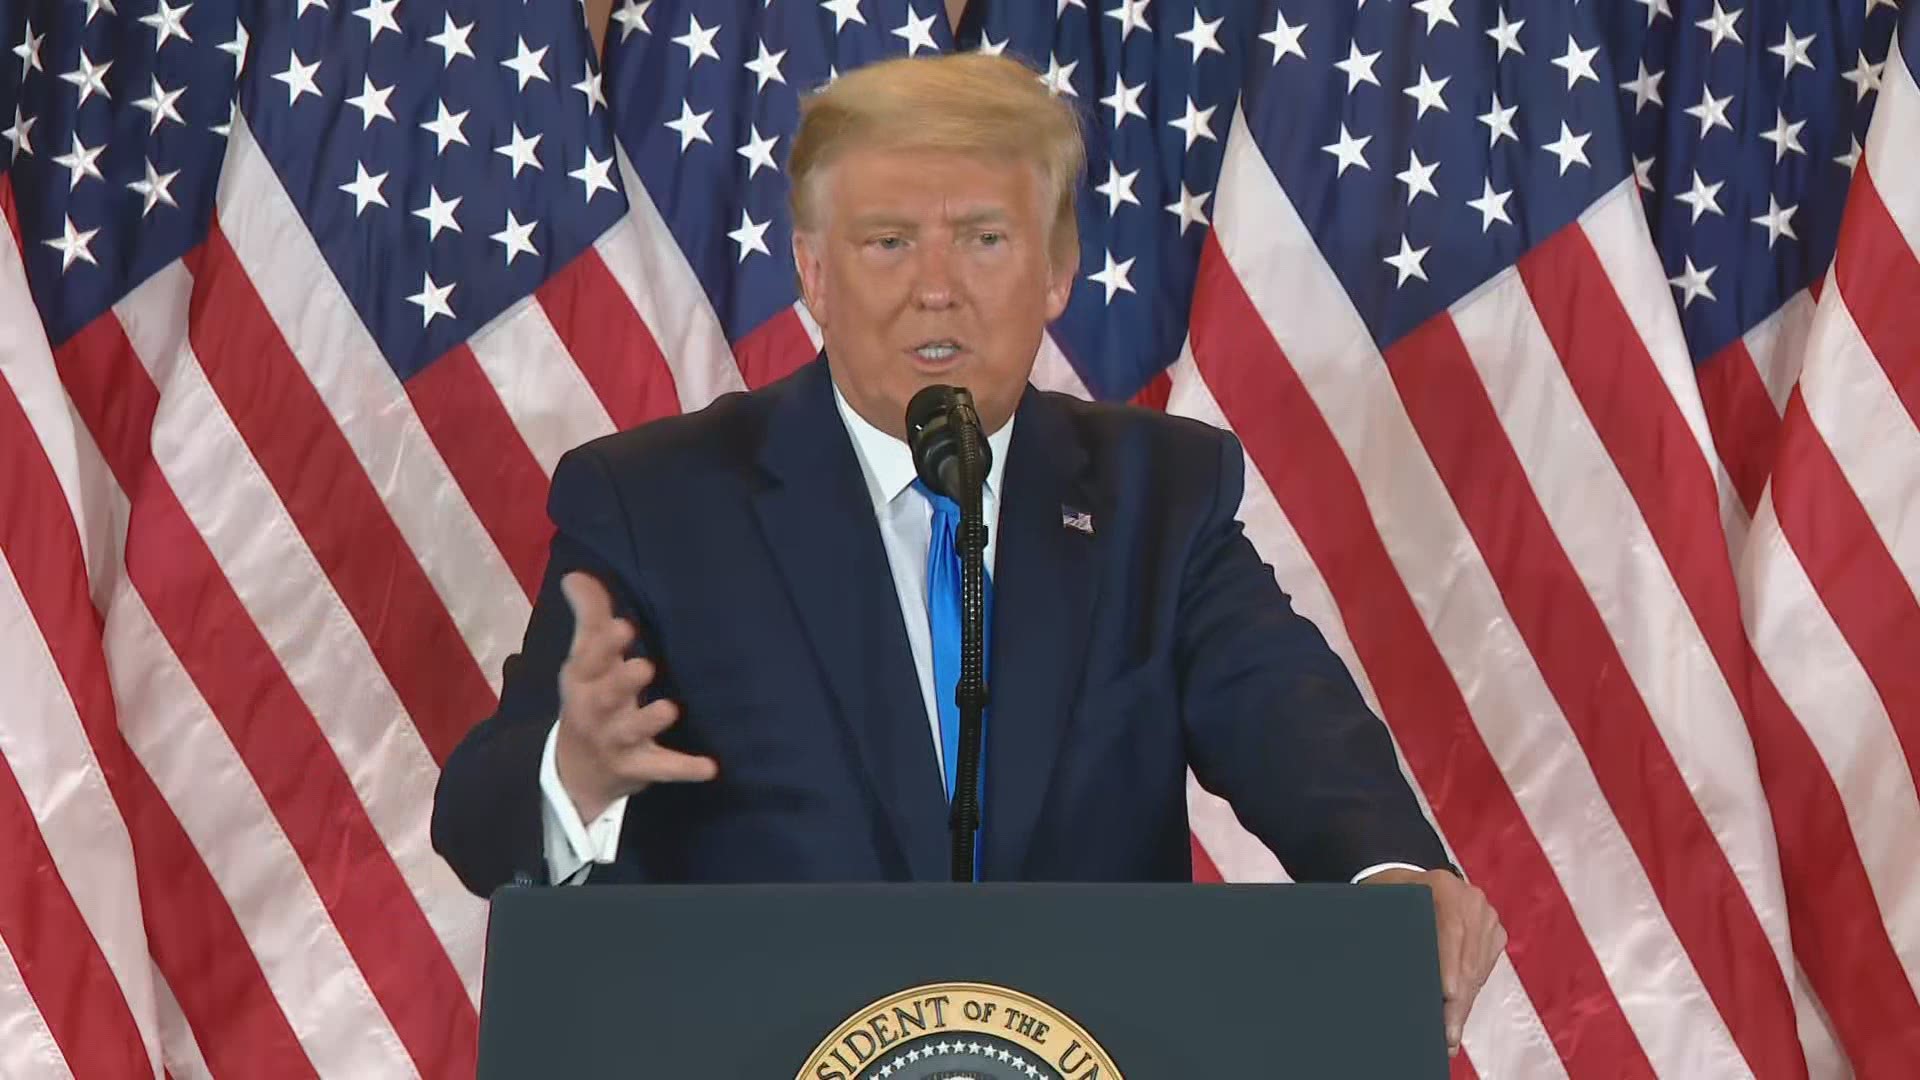 President Donald Trump spoke to supporters at The White House early Wednesday morning as several states in the 2020 election remained too close to call.